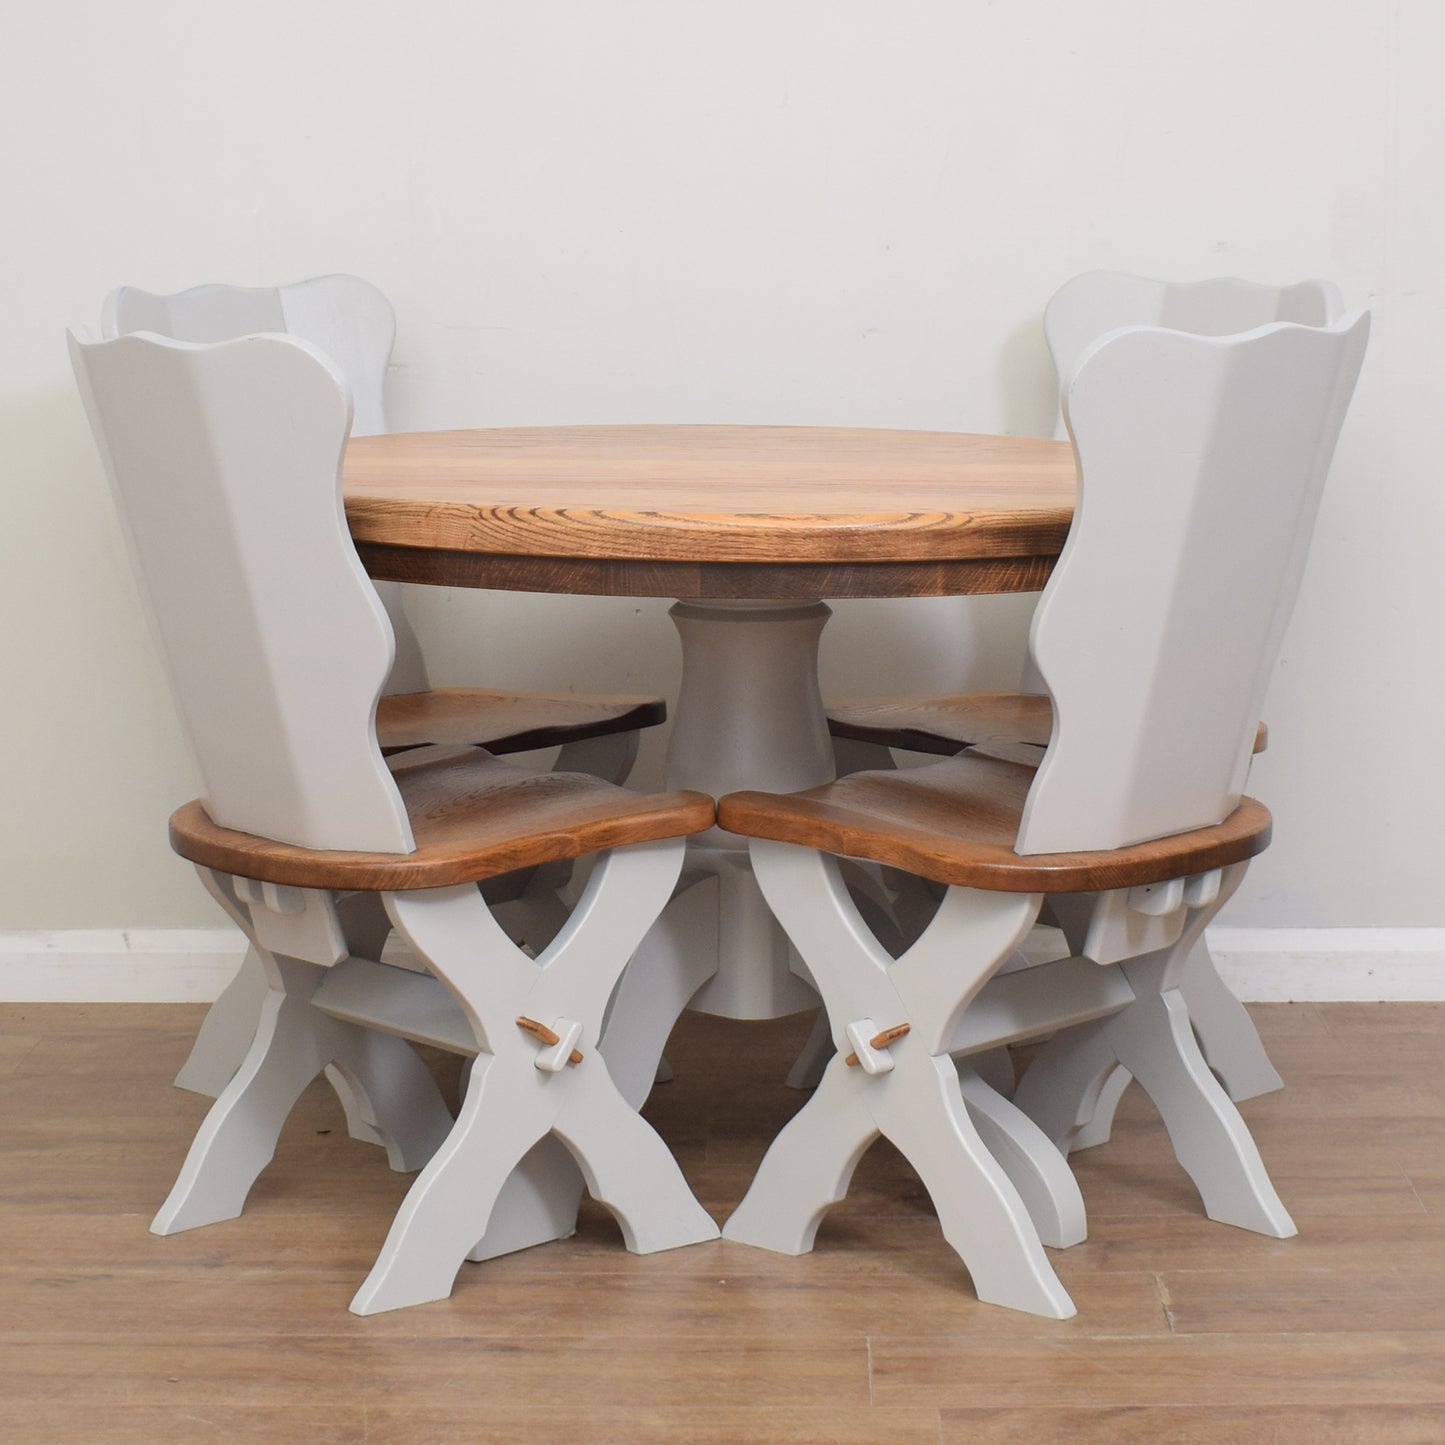 Solid Oak Round Table & Four Chairs